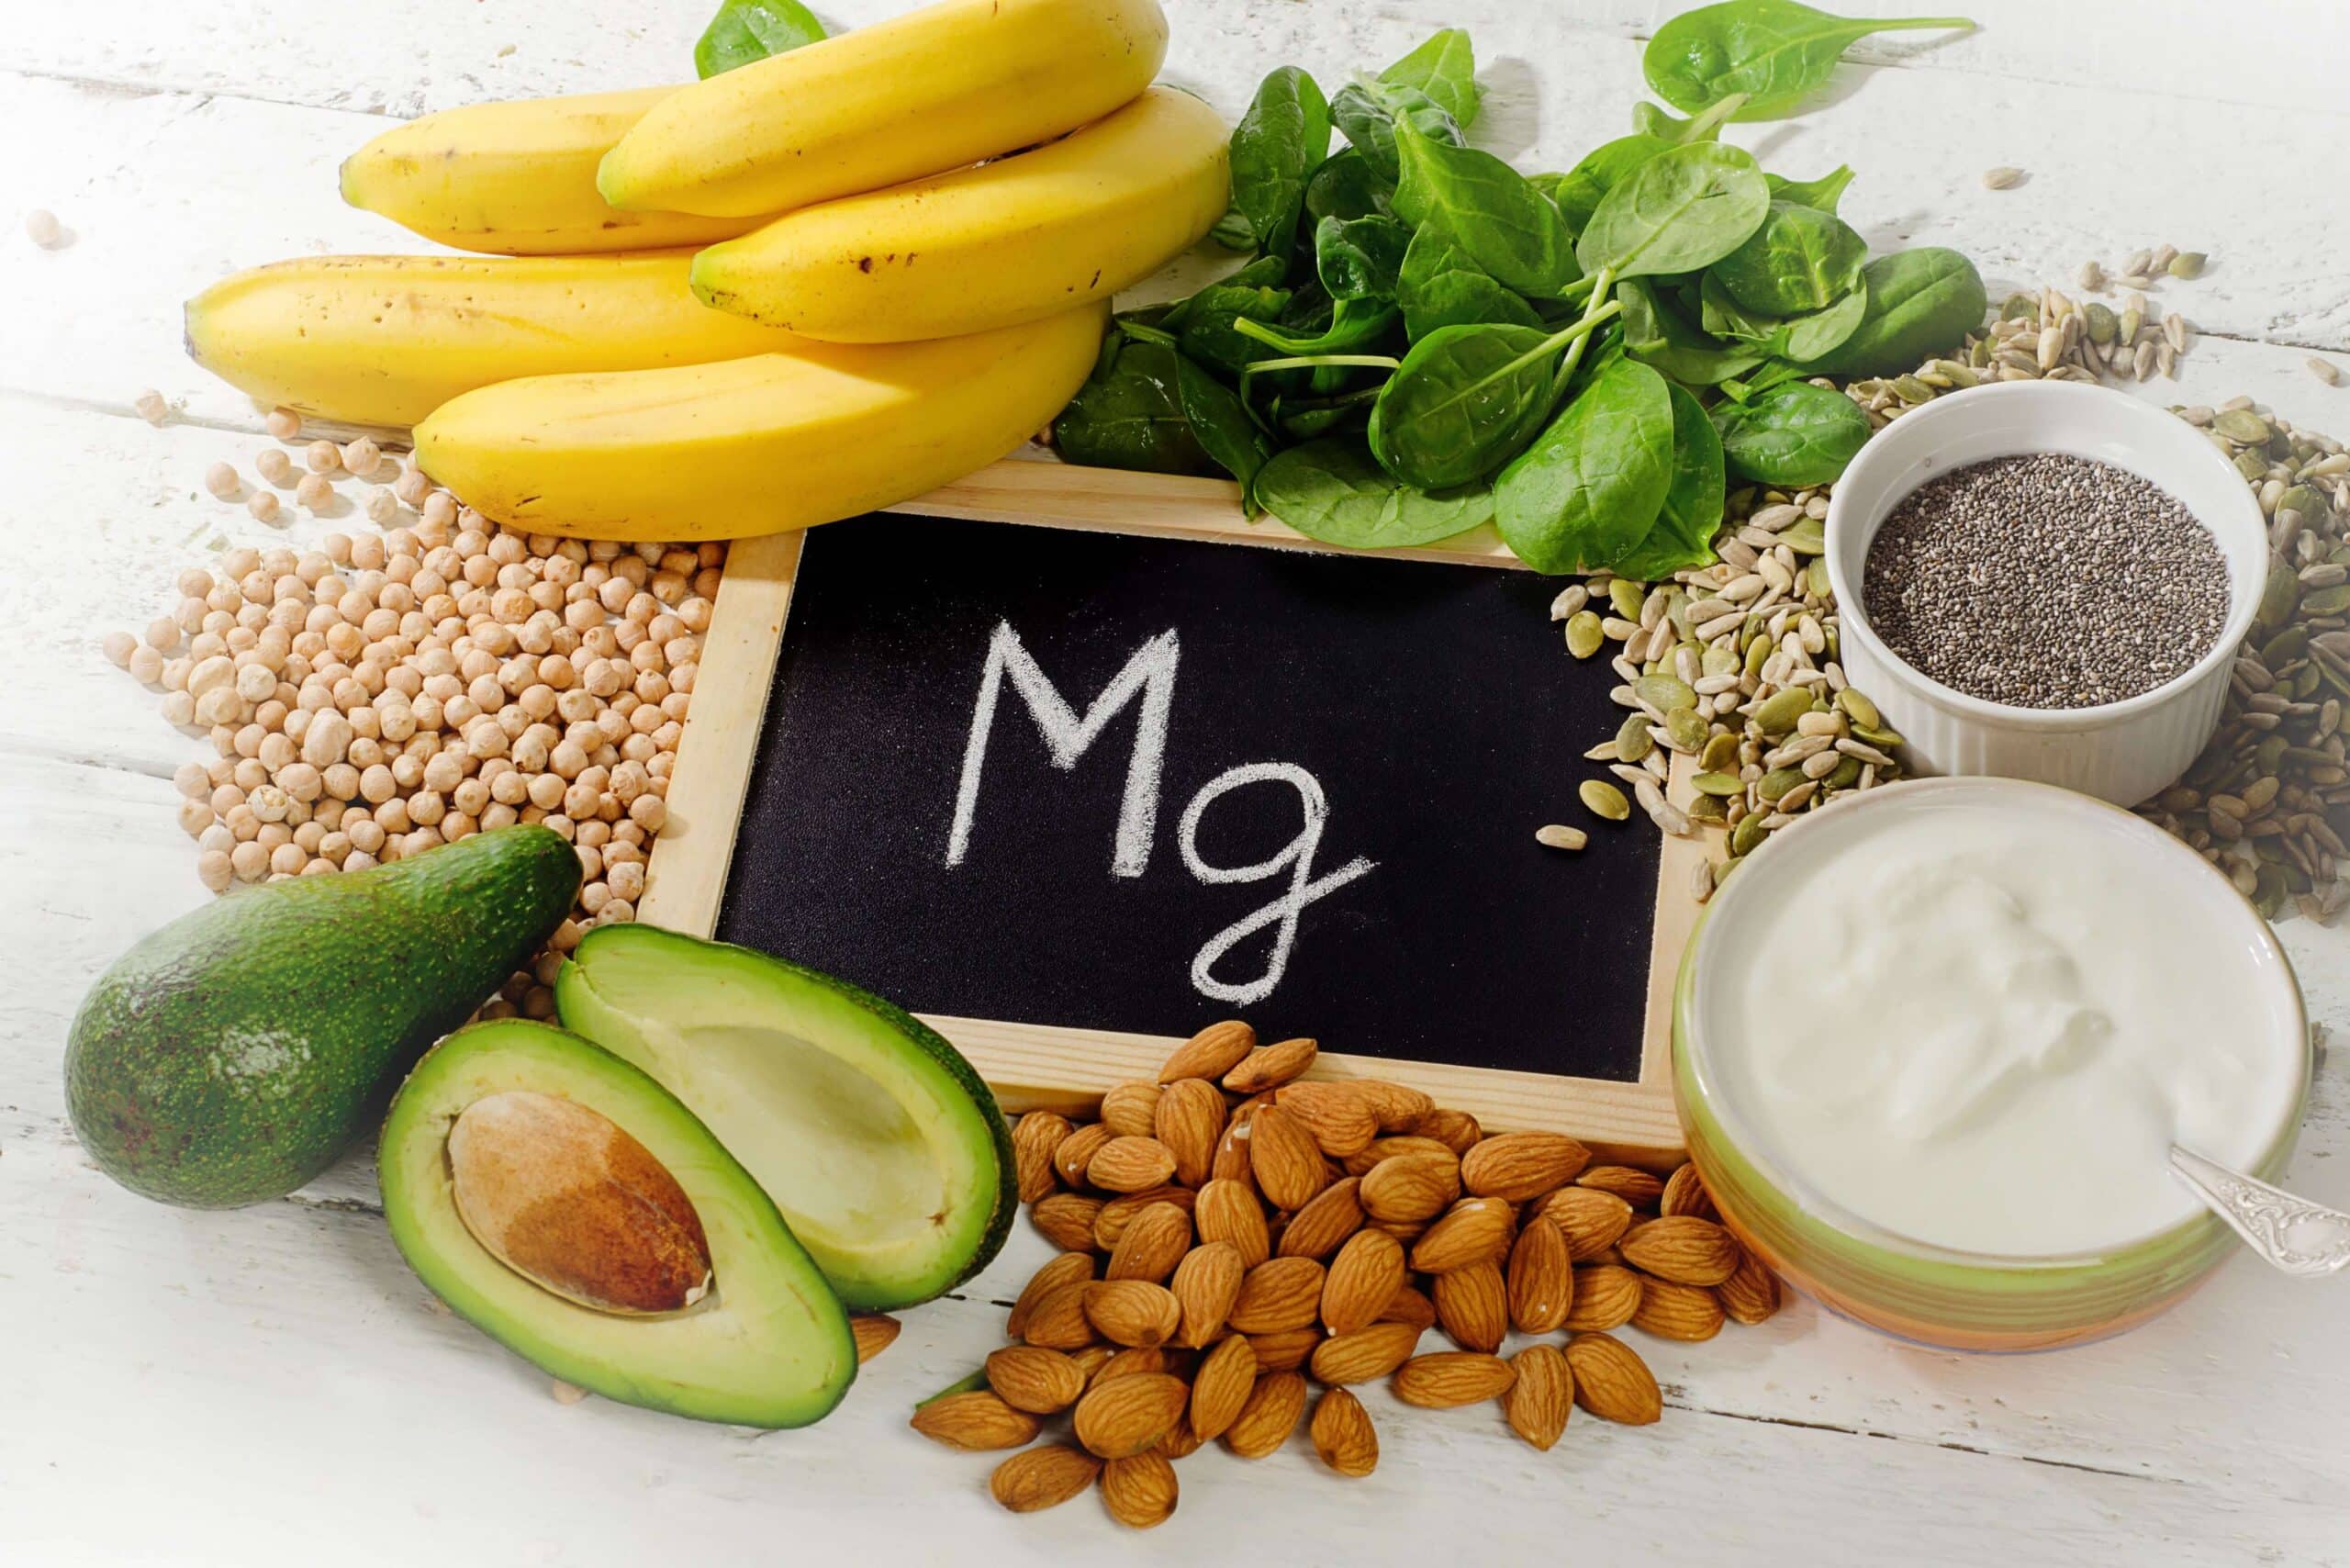 eat foods that are rich in chromium and magnesium